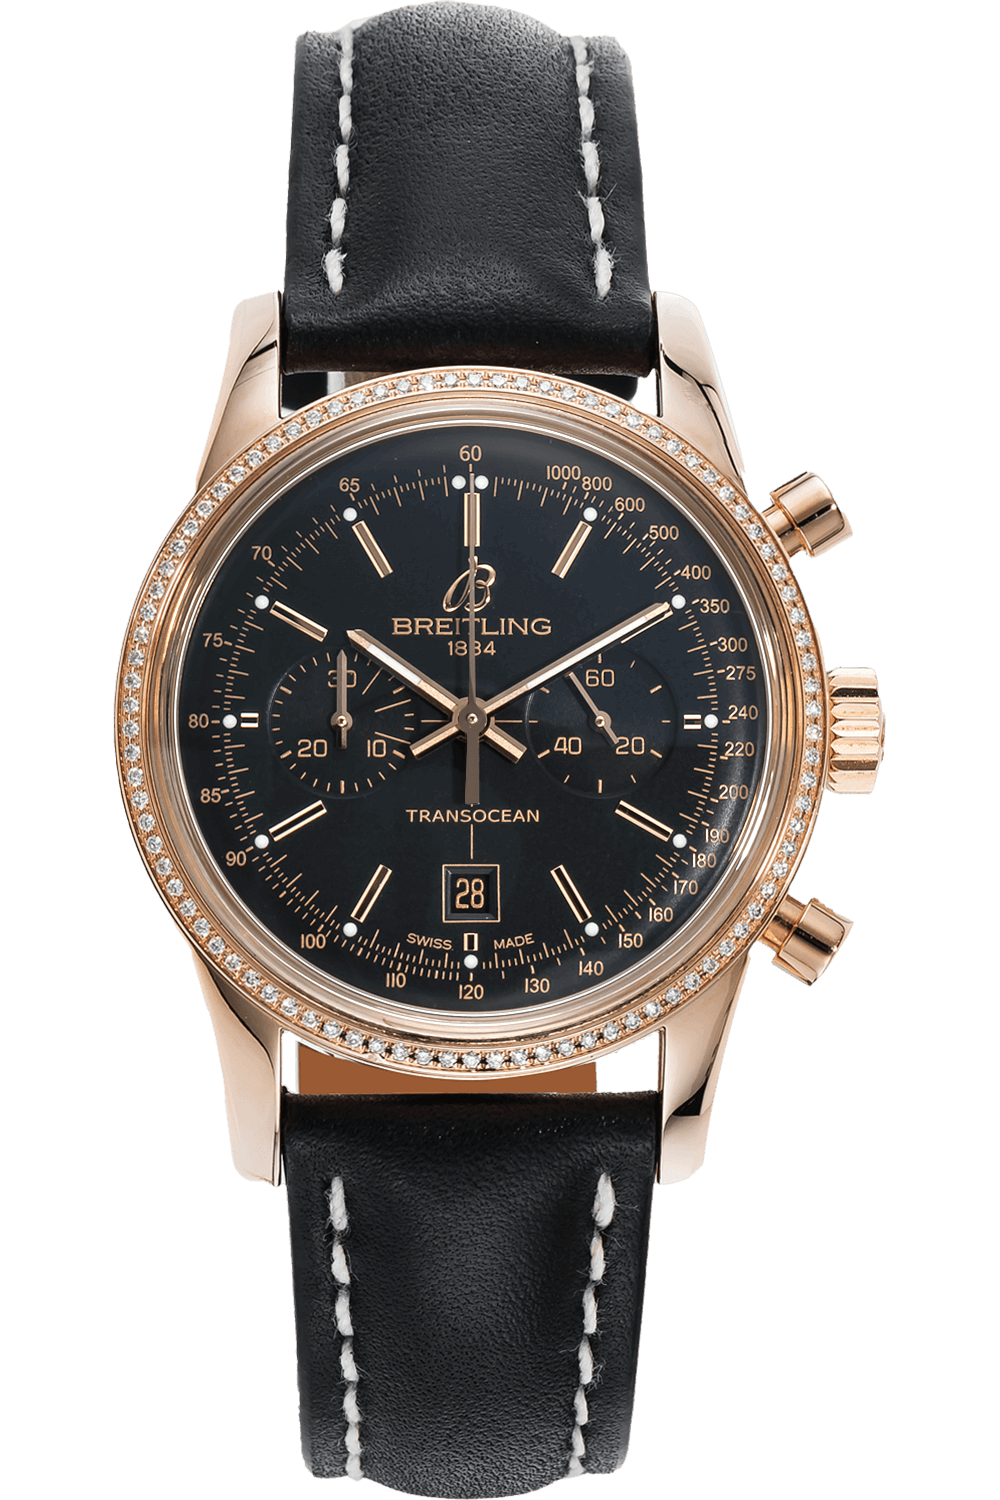 Breitling Men's Transocean Chronograph Rose Gold Automatic Watch (R4131053) | Rose/Red/Pink Gold | 38 mm Diameter | Certified Pre-owned | Tourneau